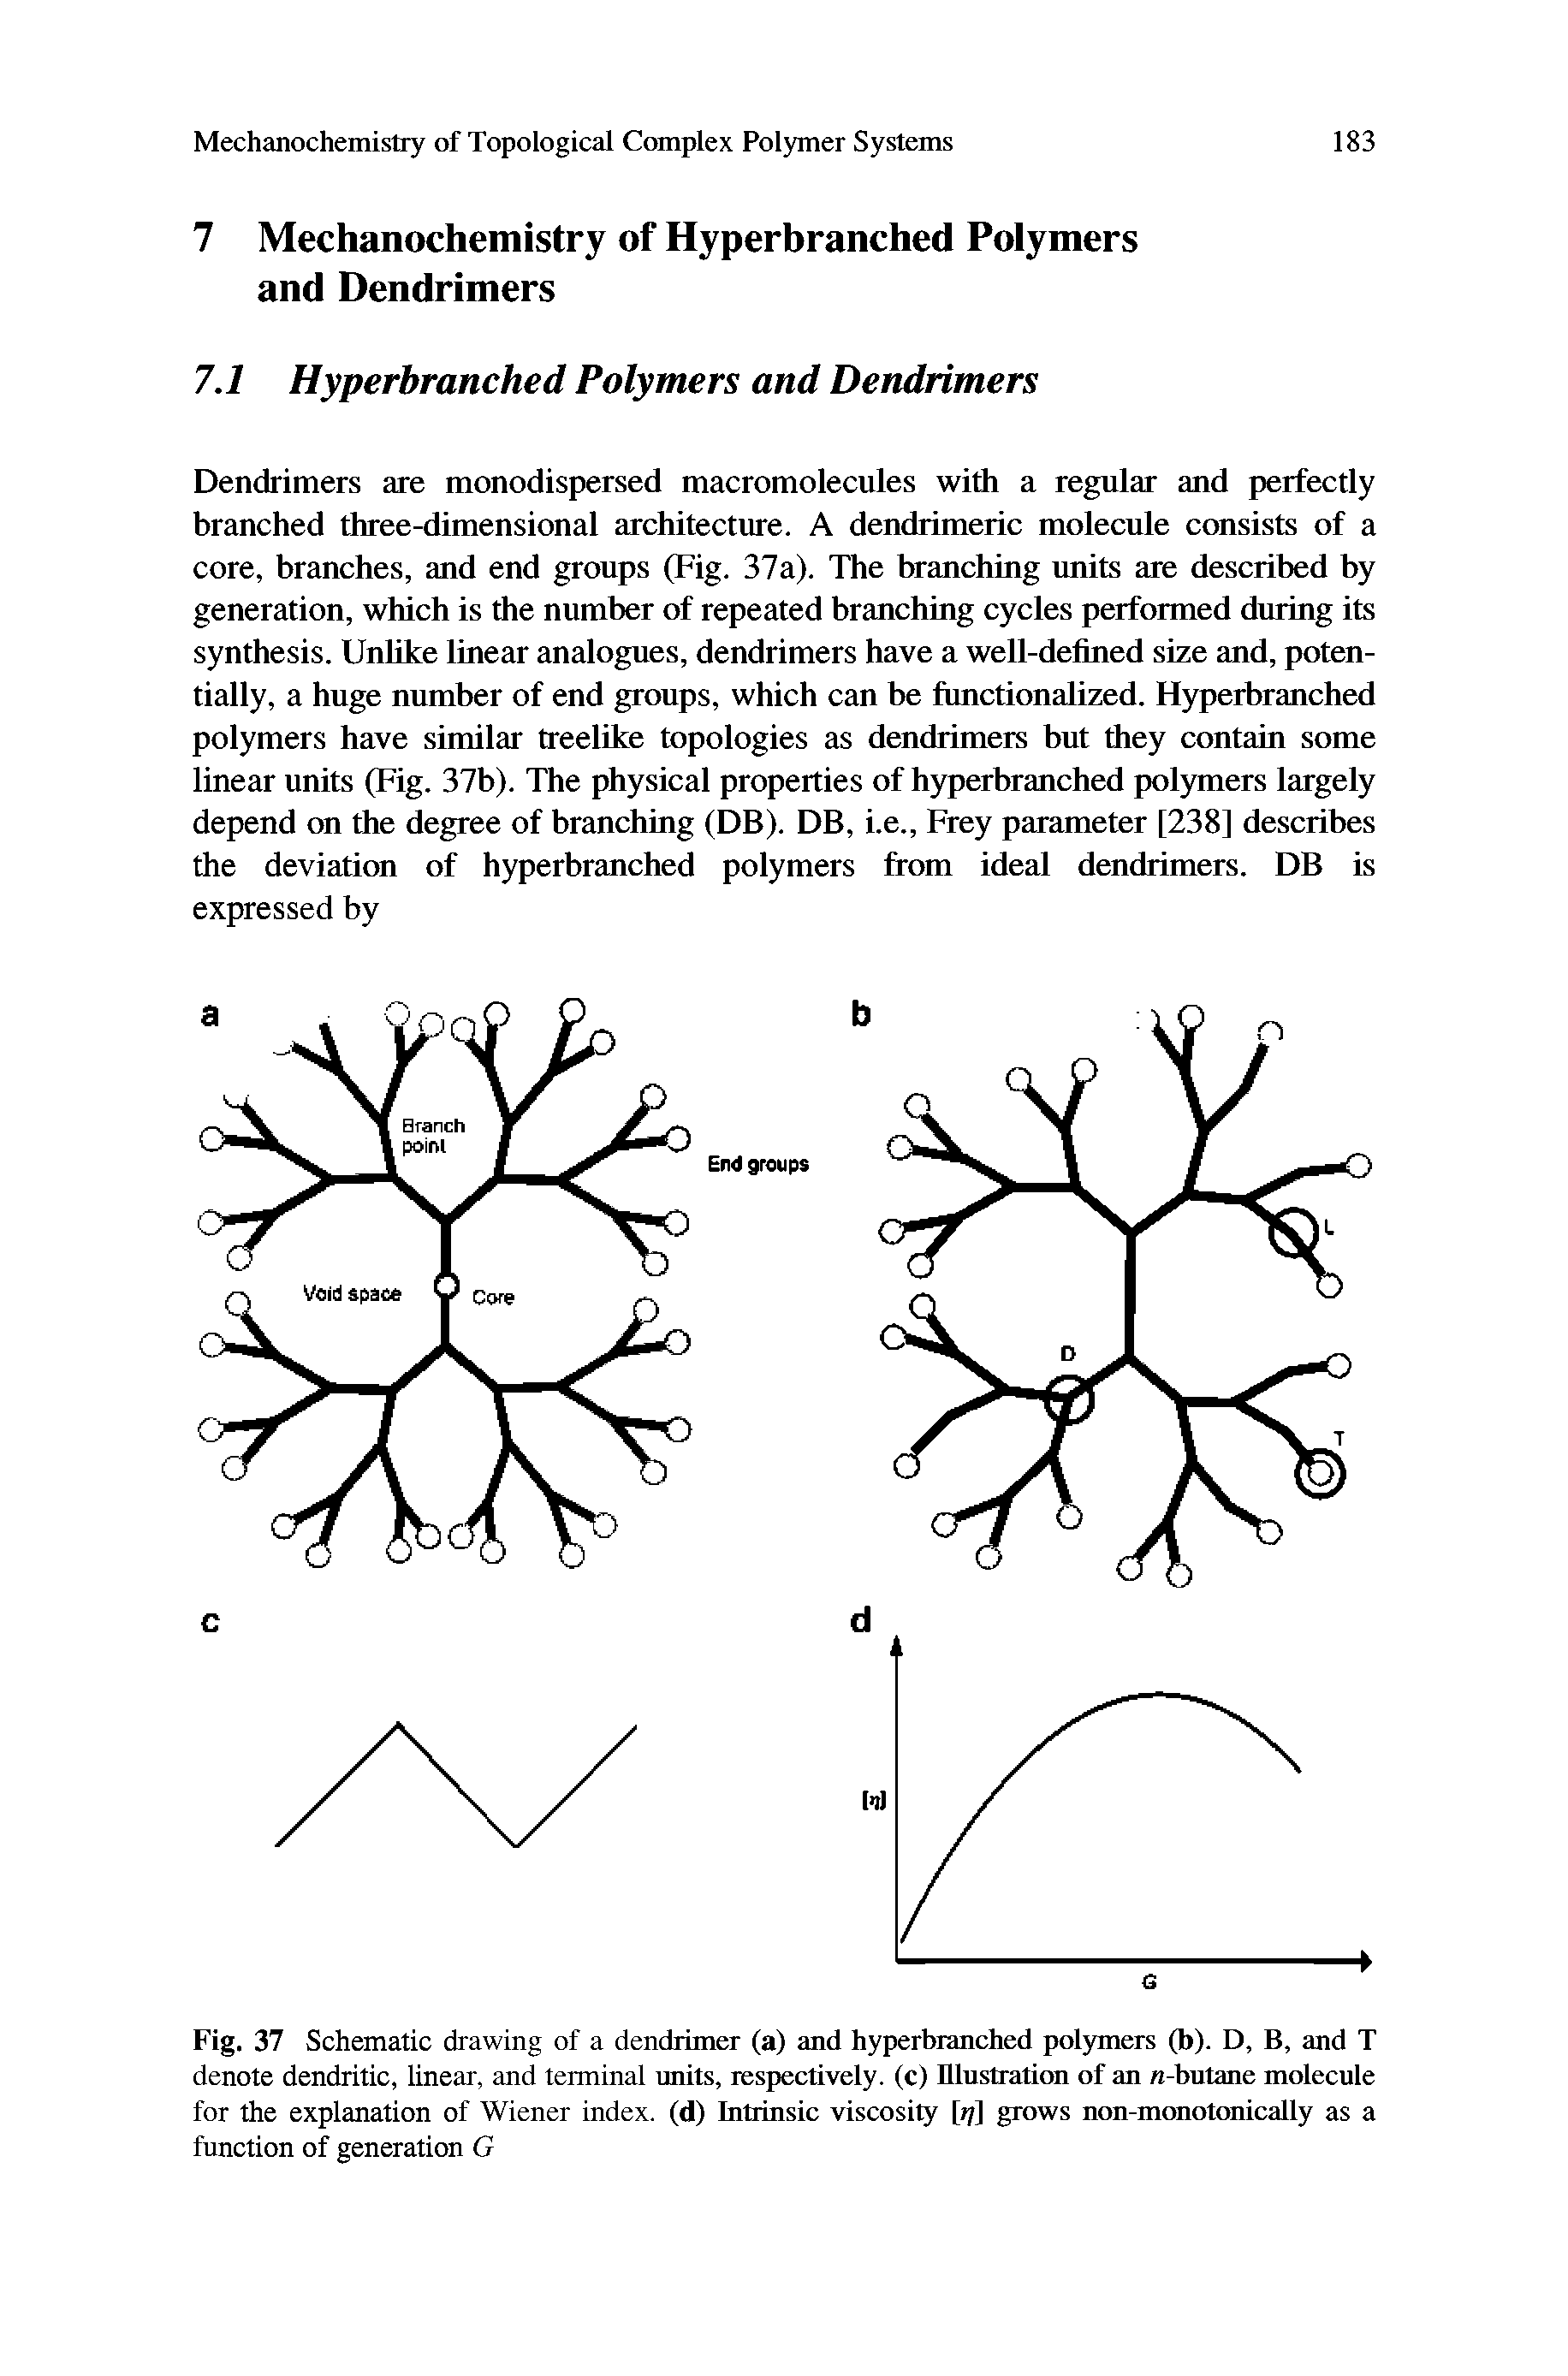 Fig. 37 Schematic drawing of a dendrimer (a) and hyperbranched polymers (b). D, B, and T denote dendritic, linear, and terminal units, respectively, (c) niustratirai of an n-butane molecule for the explanation of Wiener index, (d) Intrinsic viscosity [tj grows non-mraiotraiically as a function of generation G...